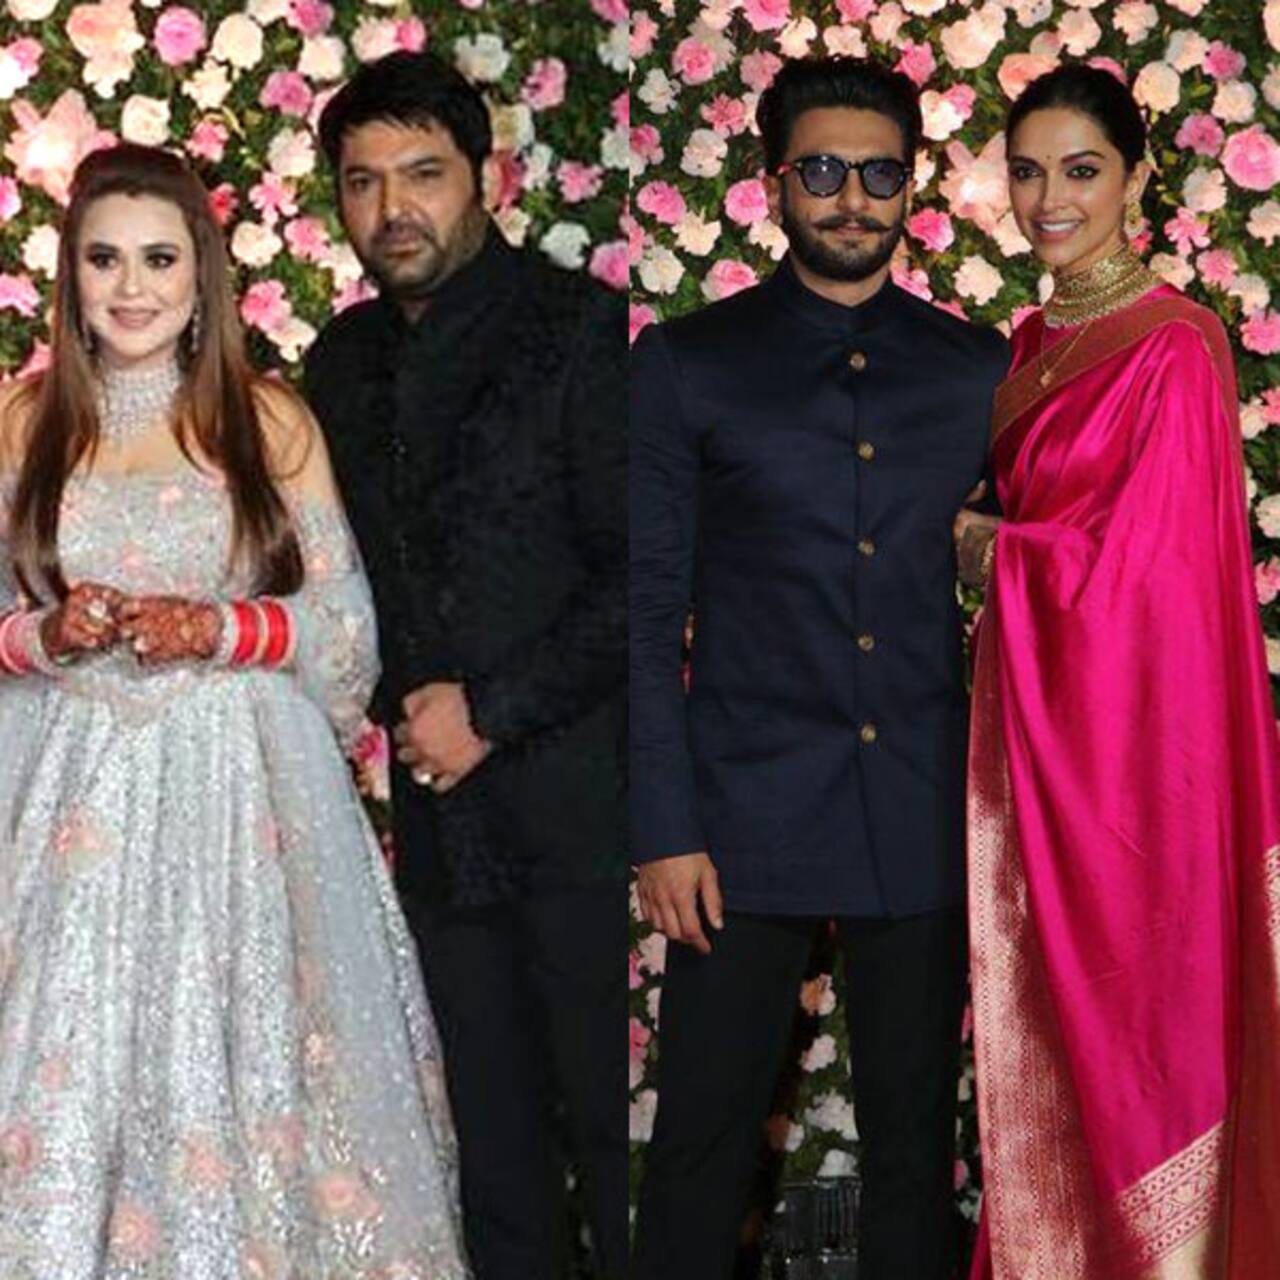 Kapil Sharma was highly embarrassed by Ranveer Singh at his wedding reception